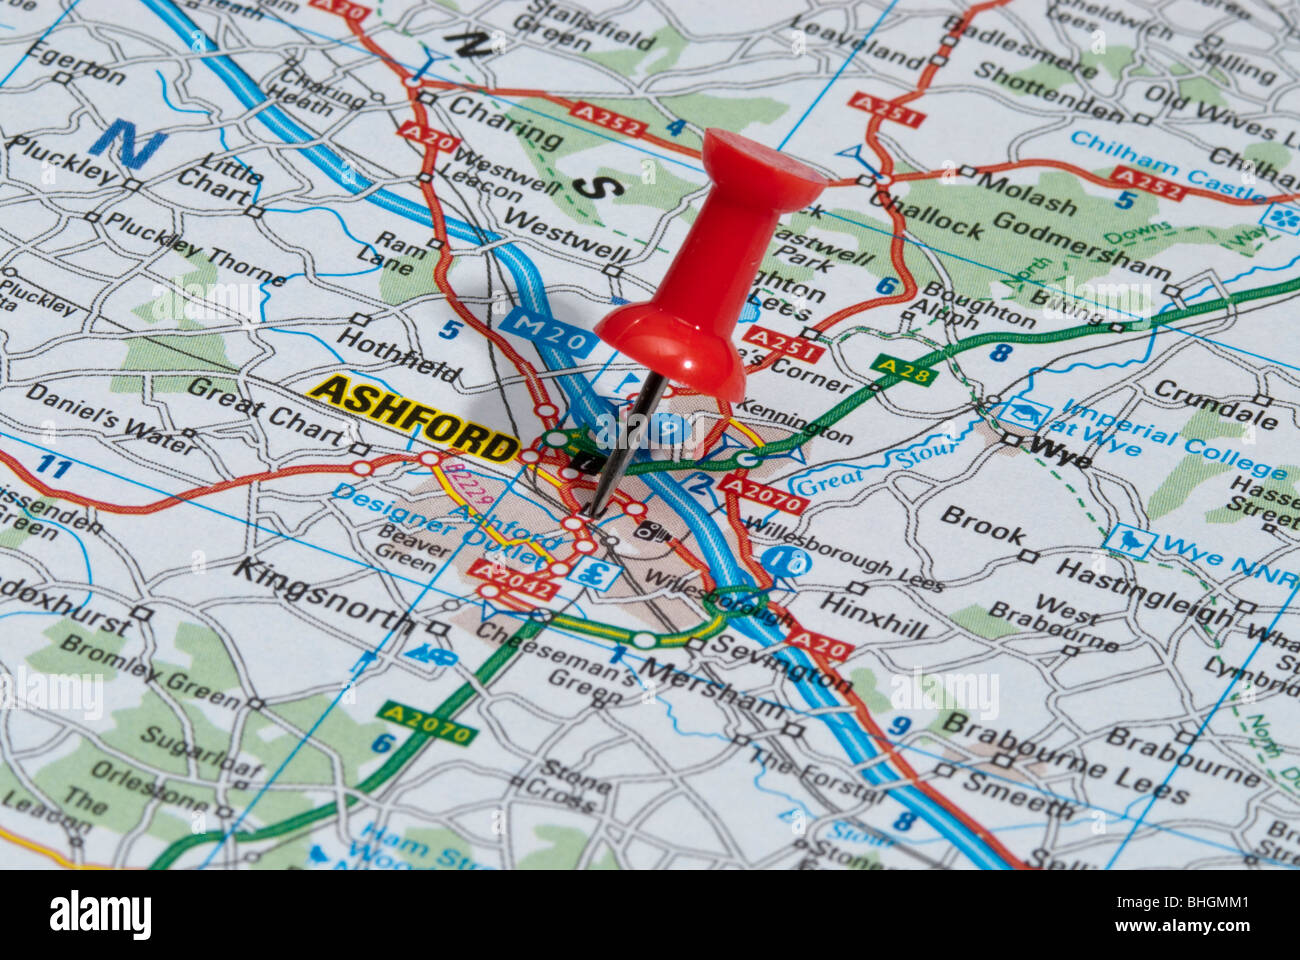 red map pin in road map pointing to city of Ashford Stock Photo